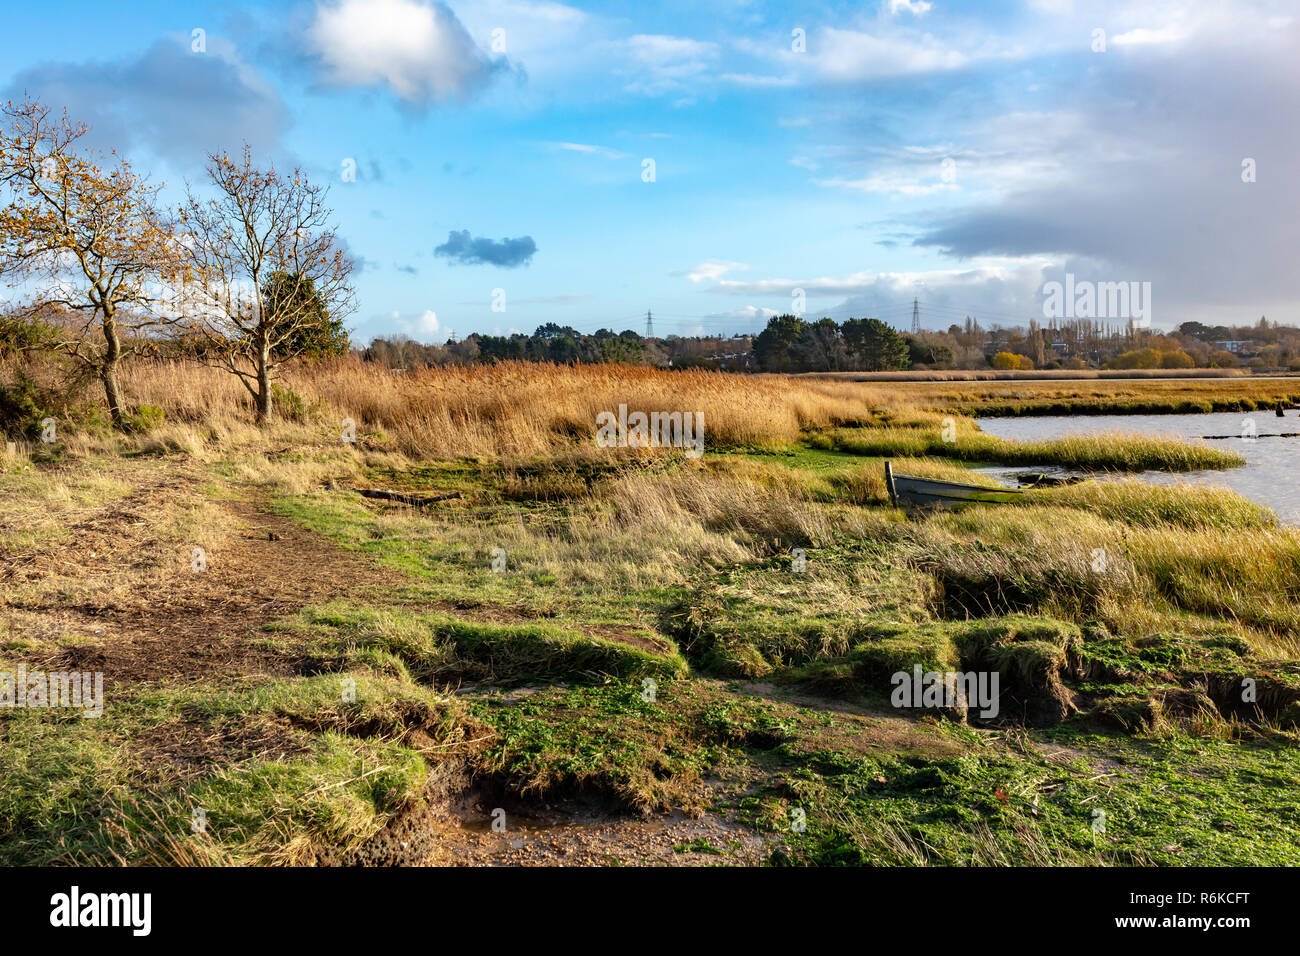 Landscape photograph of a grassland and wetland habitat with abandoned boat in frame. Stock Photo